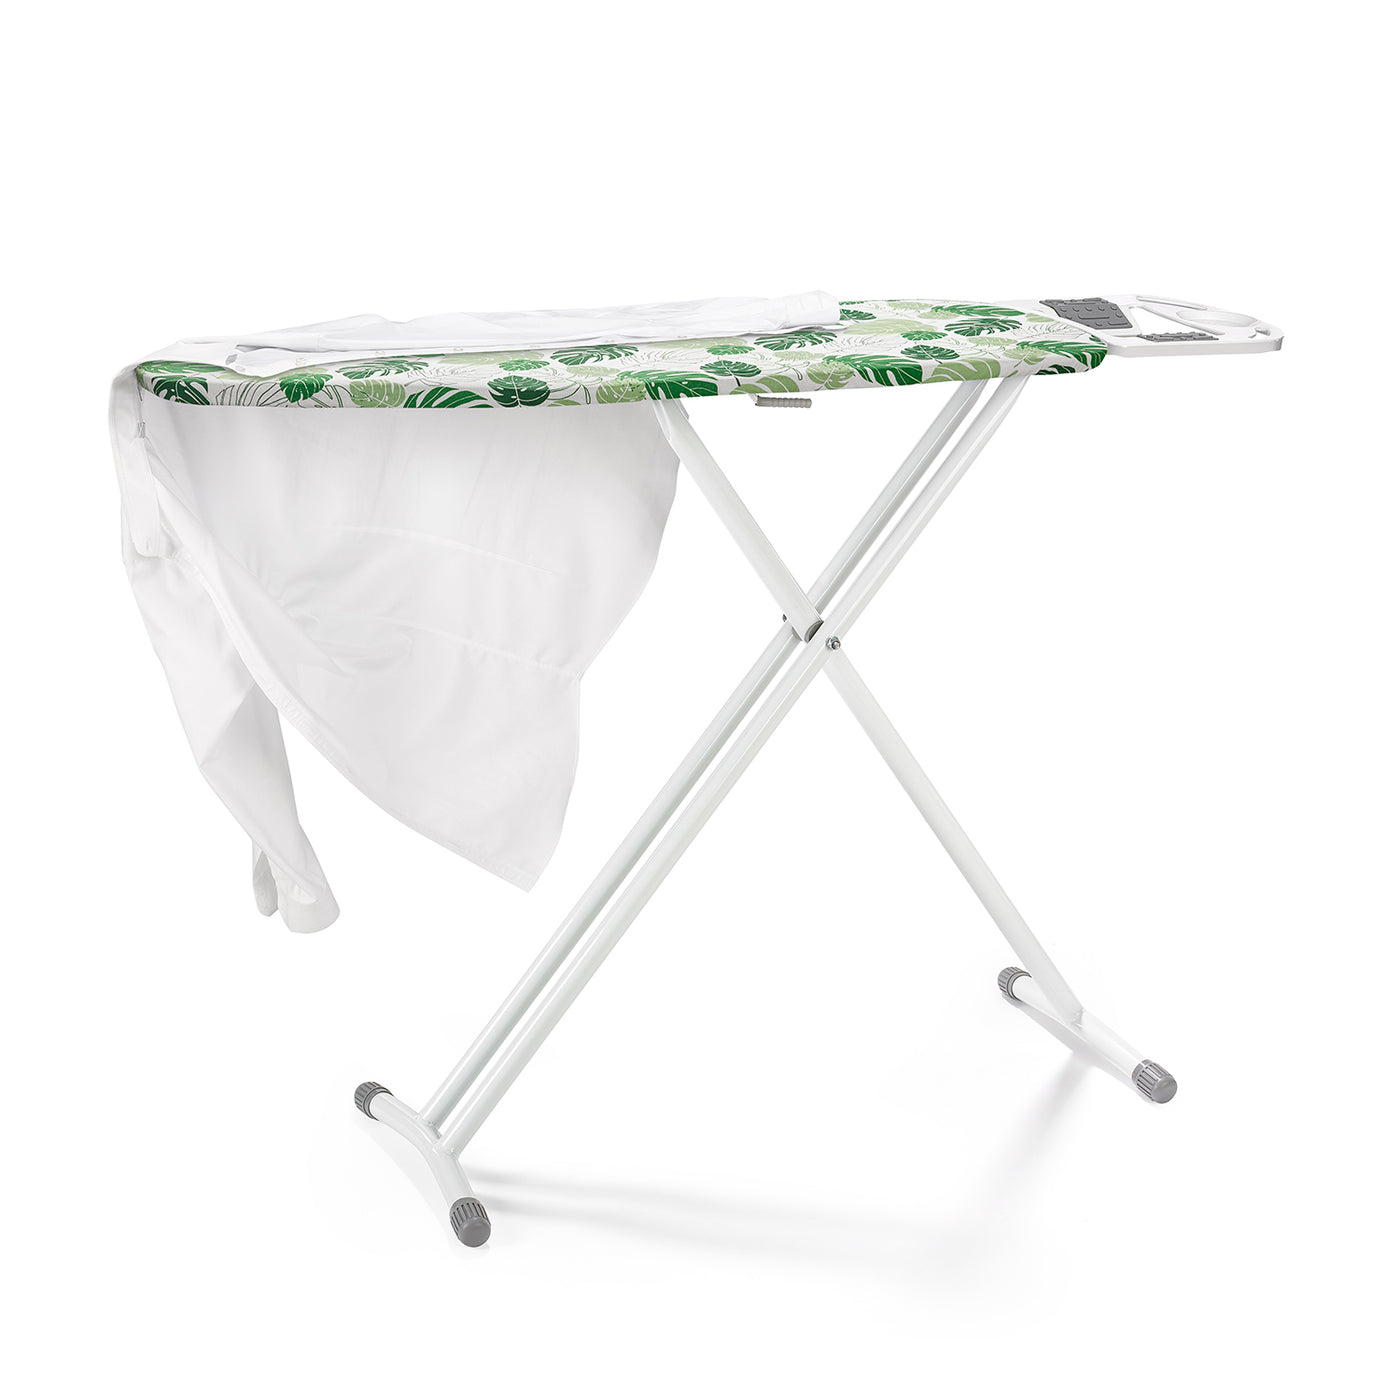 40" x 15" Deluxe Ironing Station